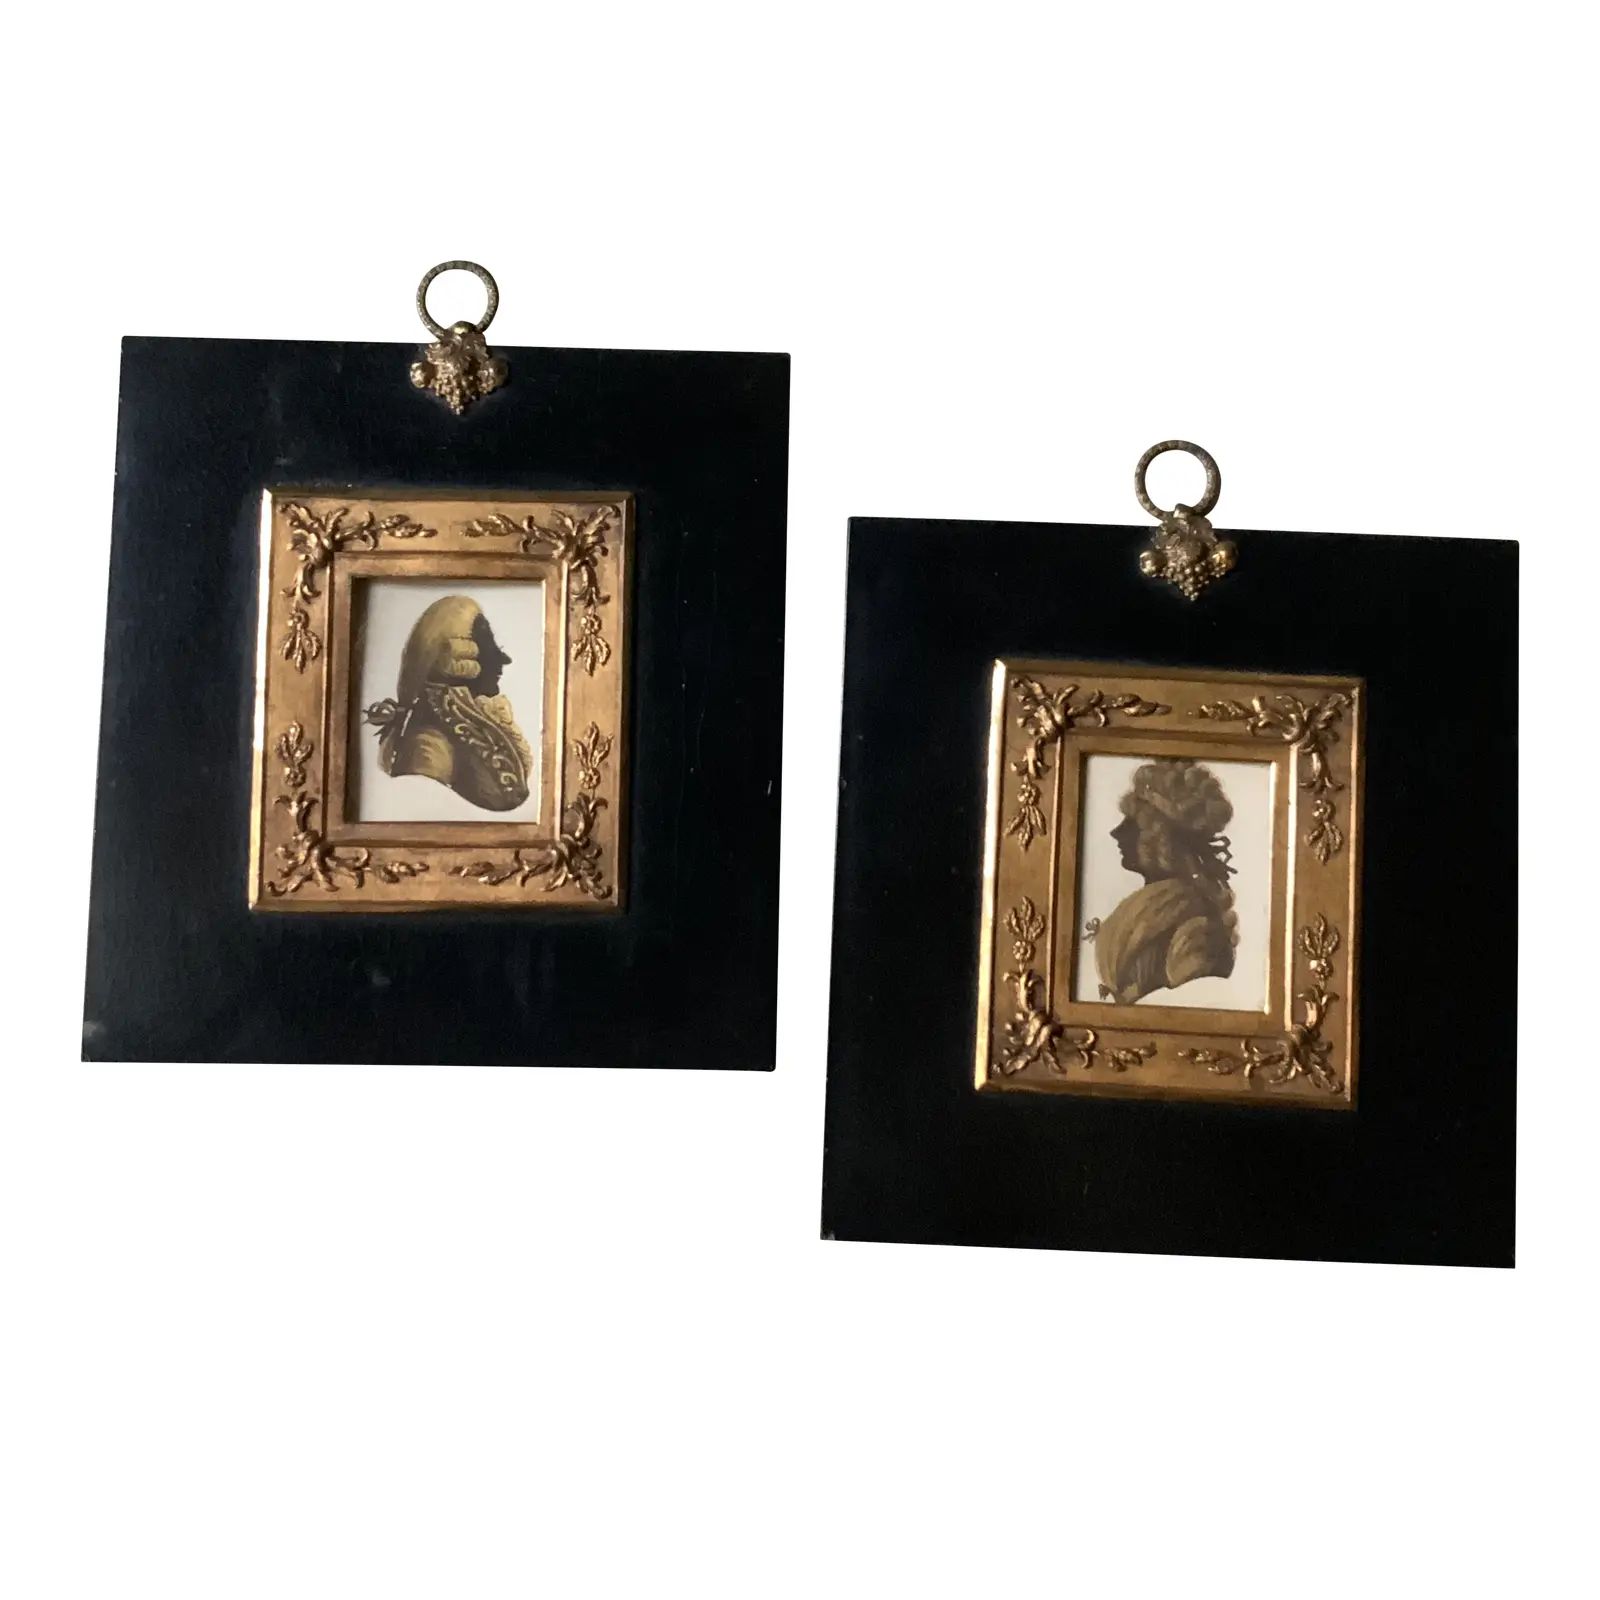 Early 19th Century English School Silhouette Oil Paintings, Framed - a Pair | Chairish